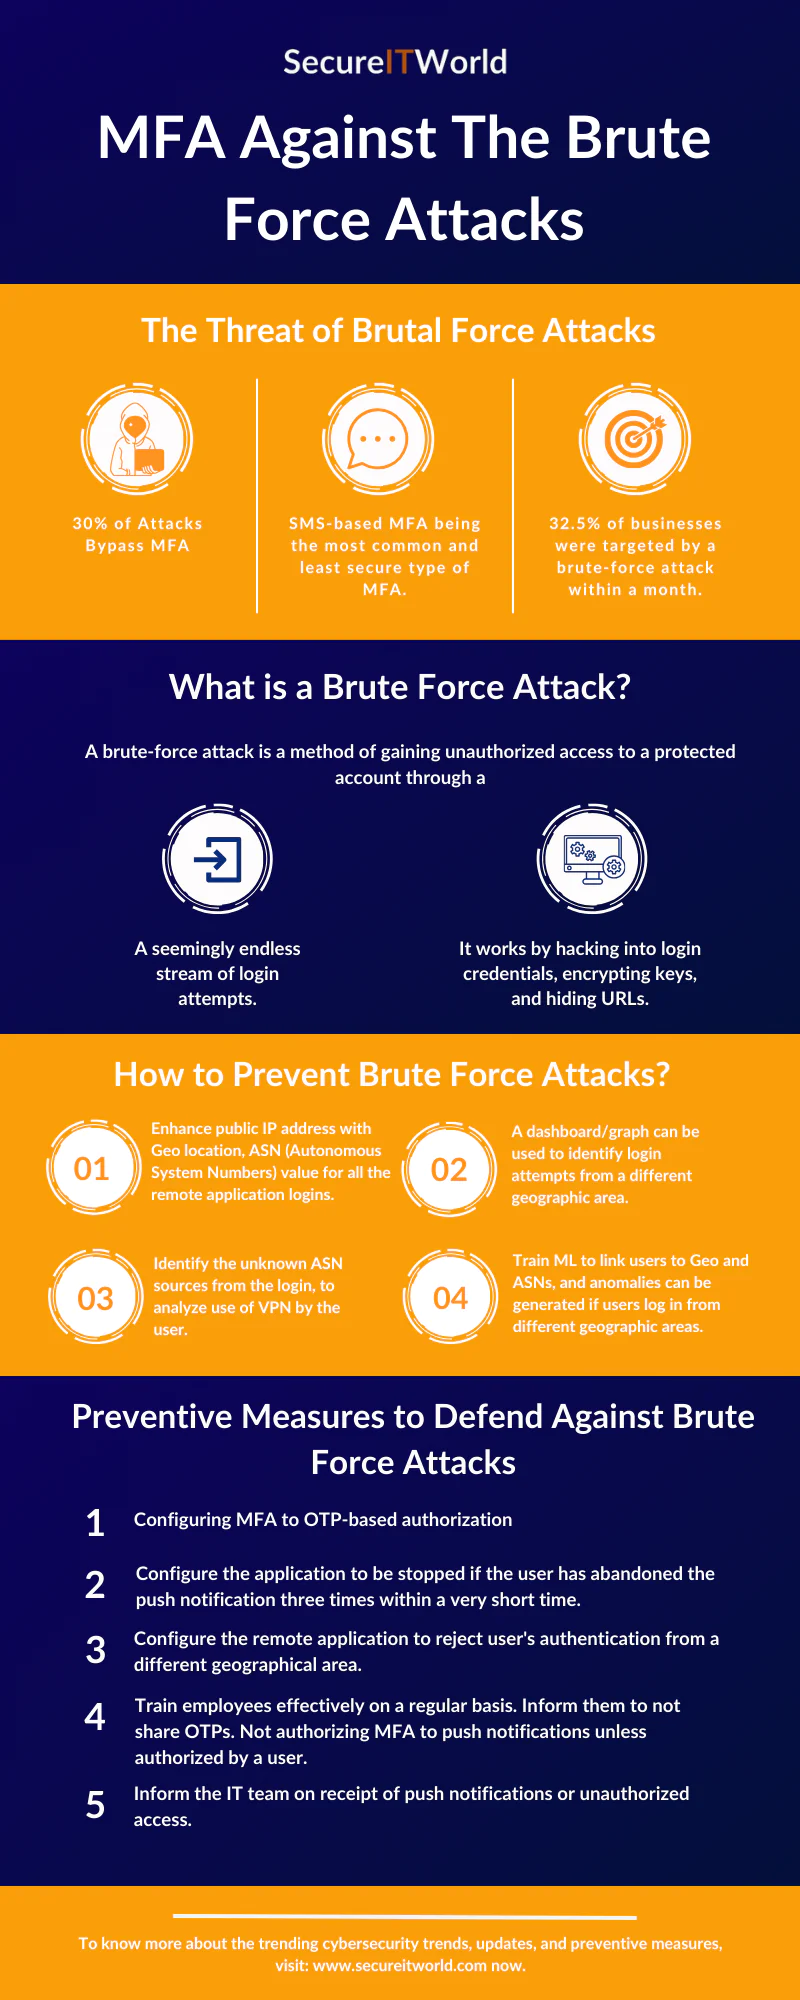 MFA Against The Brute Force Attacks